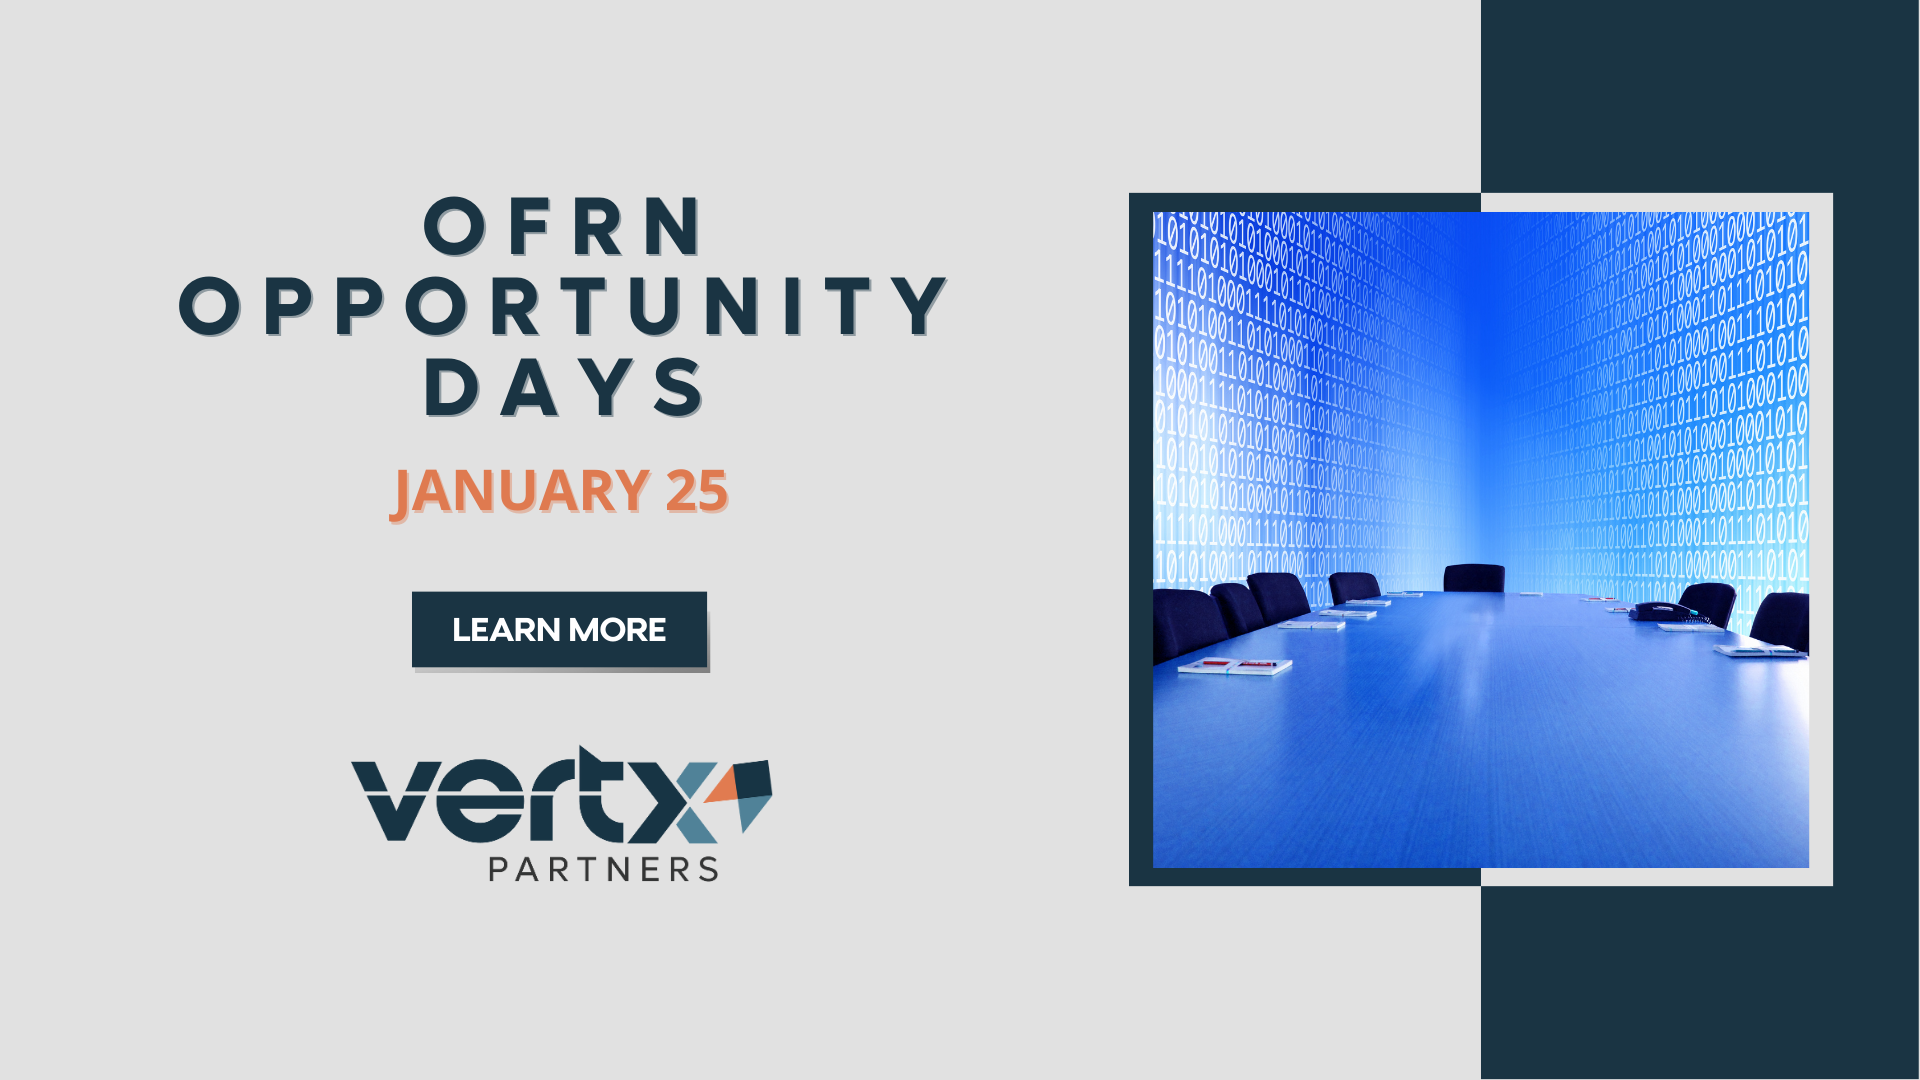 The graphic shown has the title OFRN opportunity days with the date January 25th below and a photo to the right of a conference room with blue lights in the background